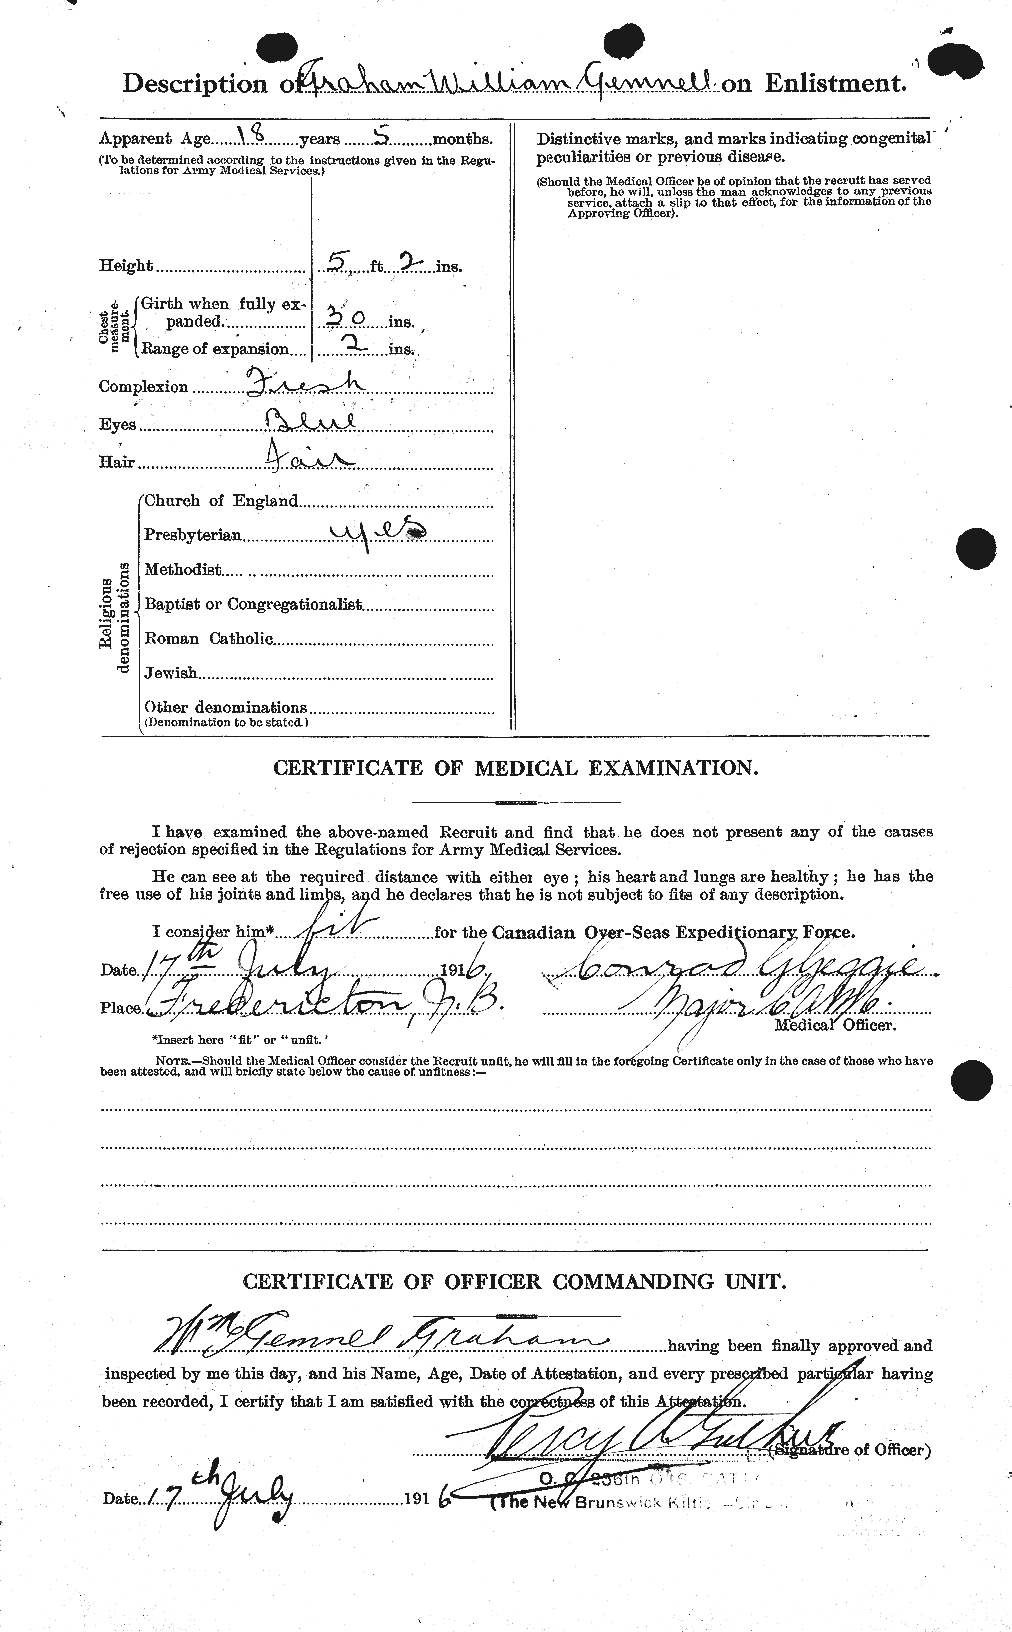 Personnel Records of the First World War - CEF 357994b